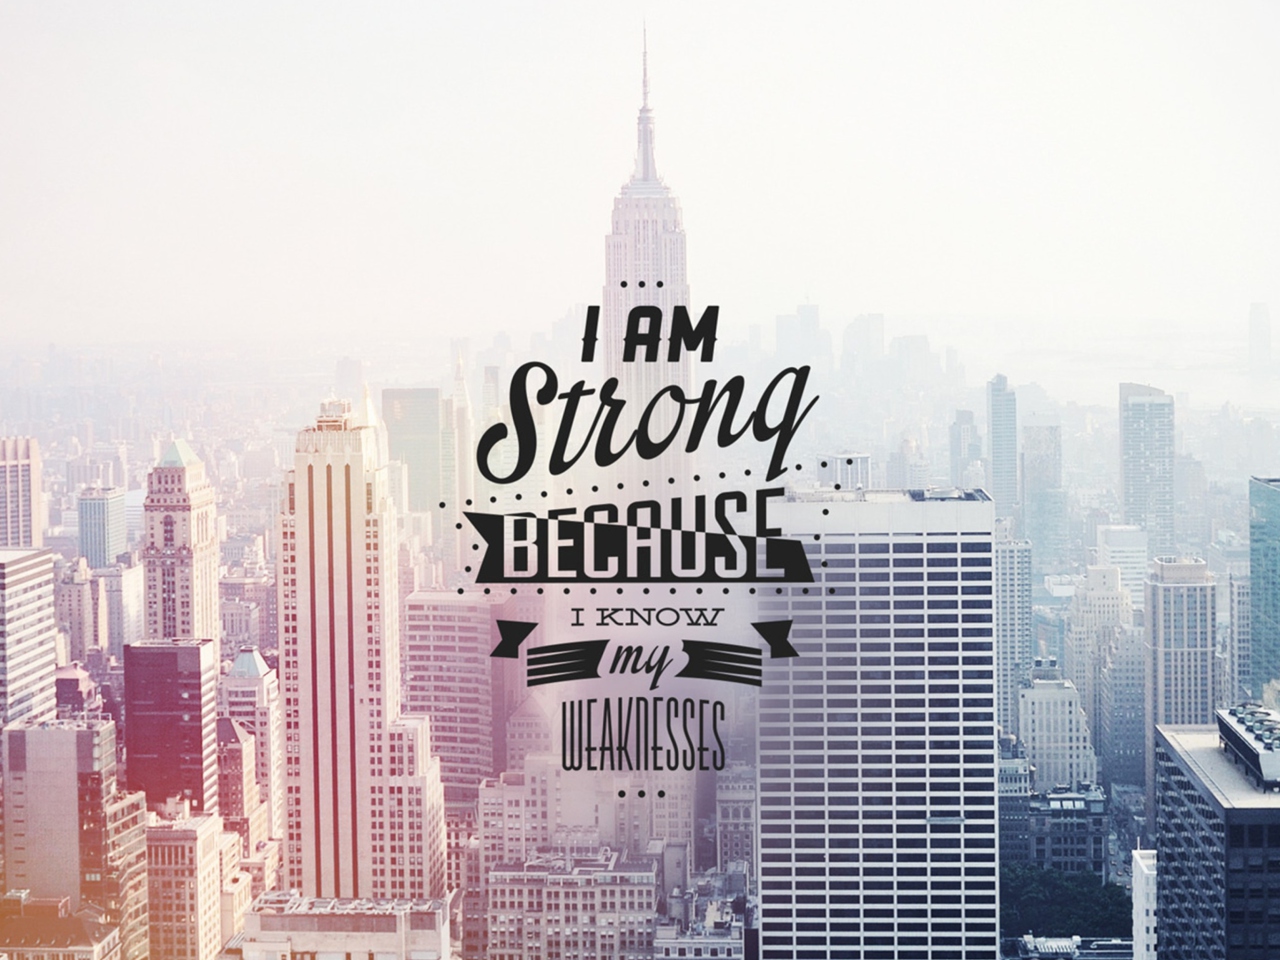 I am strong because i know my weakness screenshot #1 1280x960